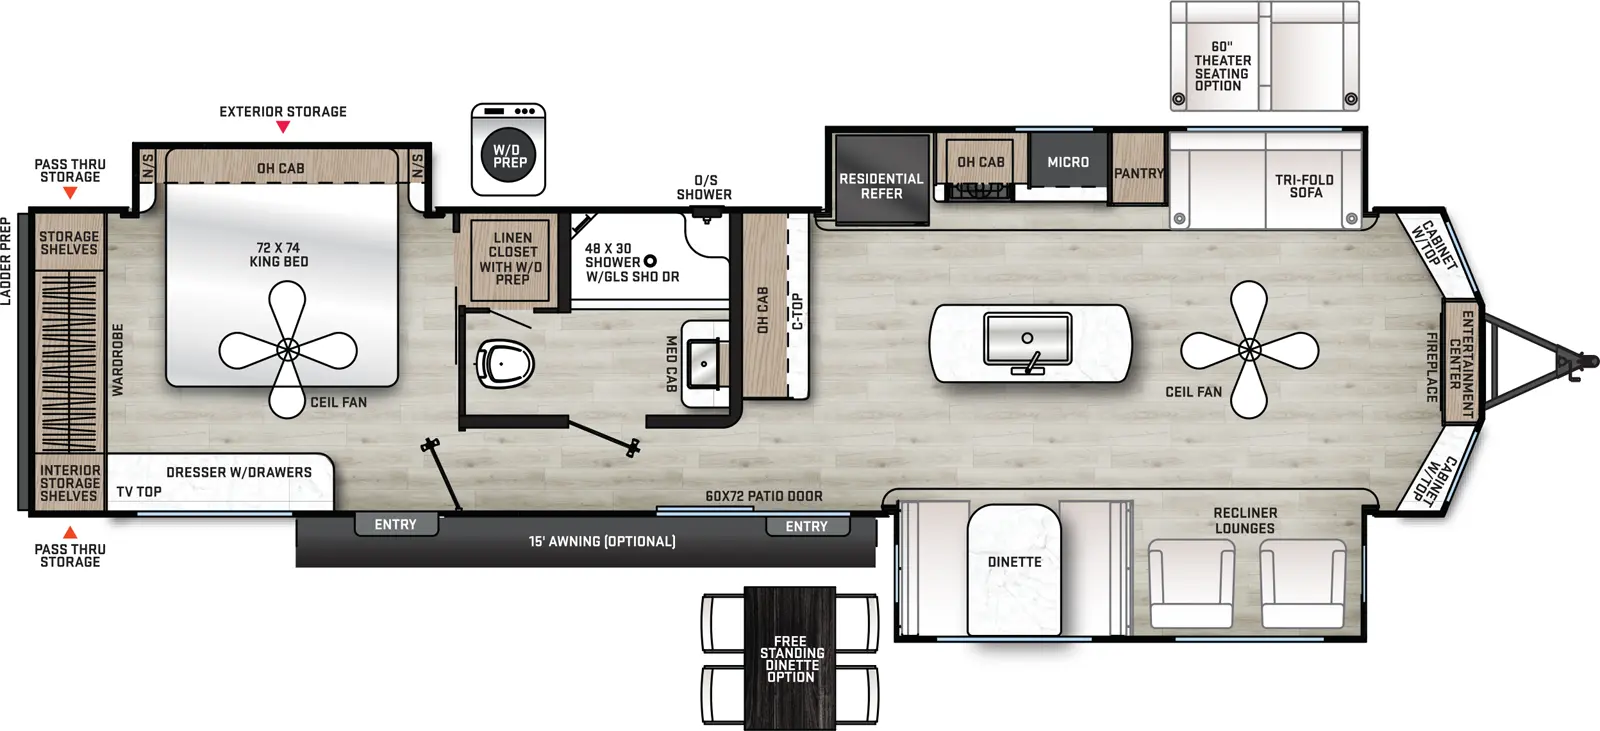 The 39MKTS has three slide outs and two entry doors. Exterior features an optional 15 foot awning. Interior layout front to back: entertainment center, with fireplace below and cabinet with top on either side; off door side slide out with tri-fold sofa, pantry, microwave, cook top stove, overhead cabinet, and residential refrigerator; kitchen island with sink and paddle fan; door side slide out with recliner lounges and dinette; countertop with overhead cabinet along inner wall; patio door entry; off door side full bathroom with medicine cabinet and linen closet; rear bedroom with off door side king bed slide out with overhead cabinet and night stands on each side, closet with washer/dryer prep, dresser with drawers and TV top on door side, rear wardrobe with storage shelves, and second entry door. Optional free standing dinette available in place of standard dinette.